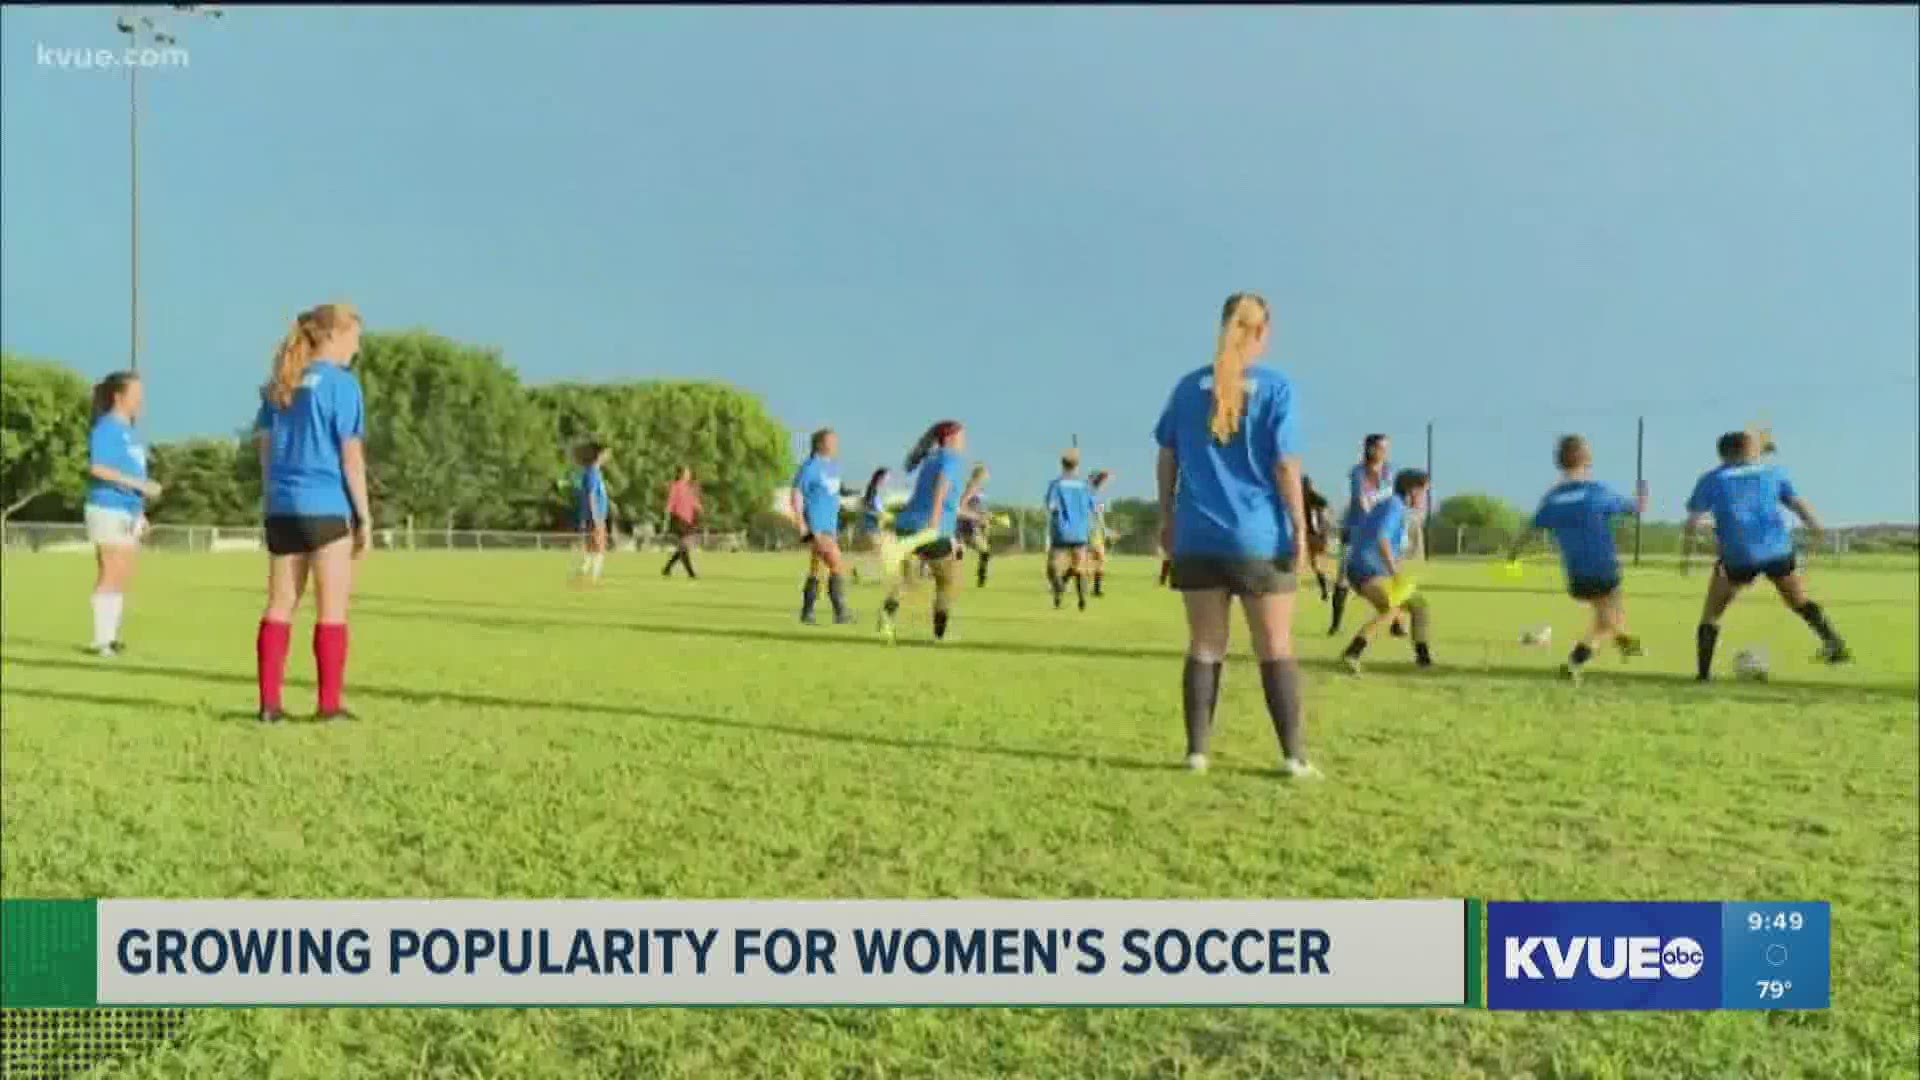 The hype for Austin FC's arrival is leading to overwhelming support for women's soccer, too.